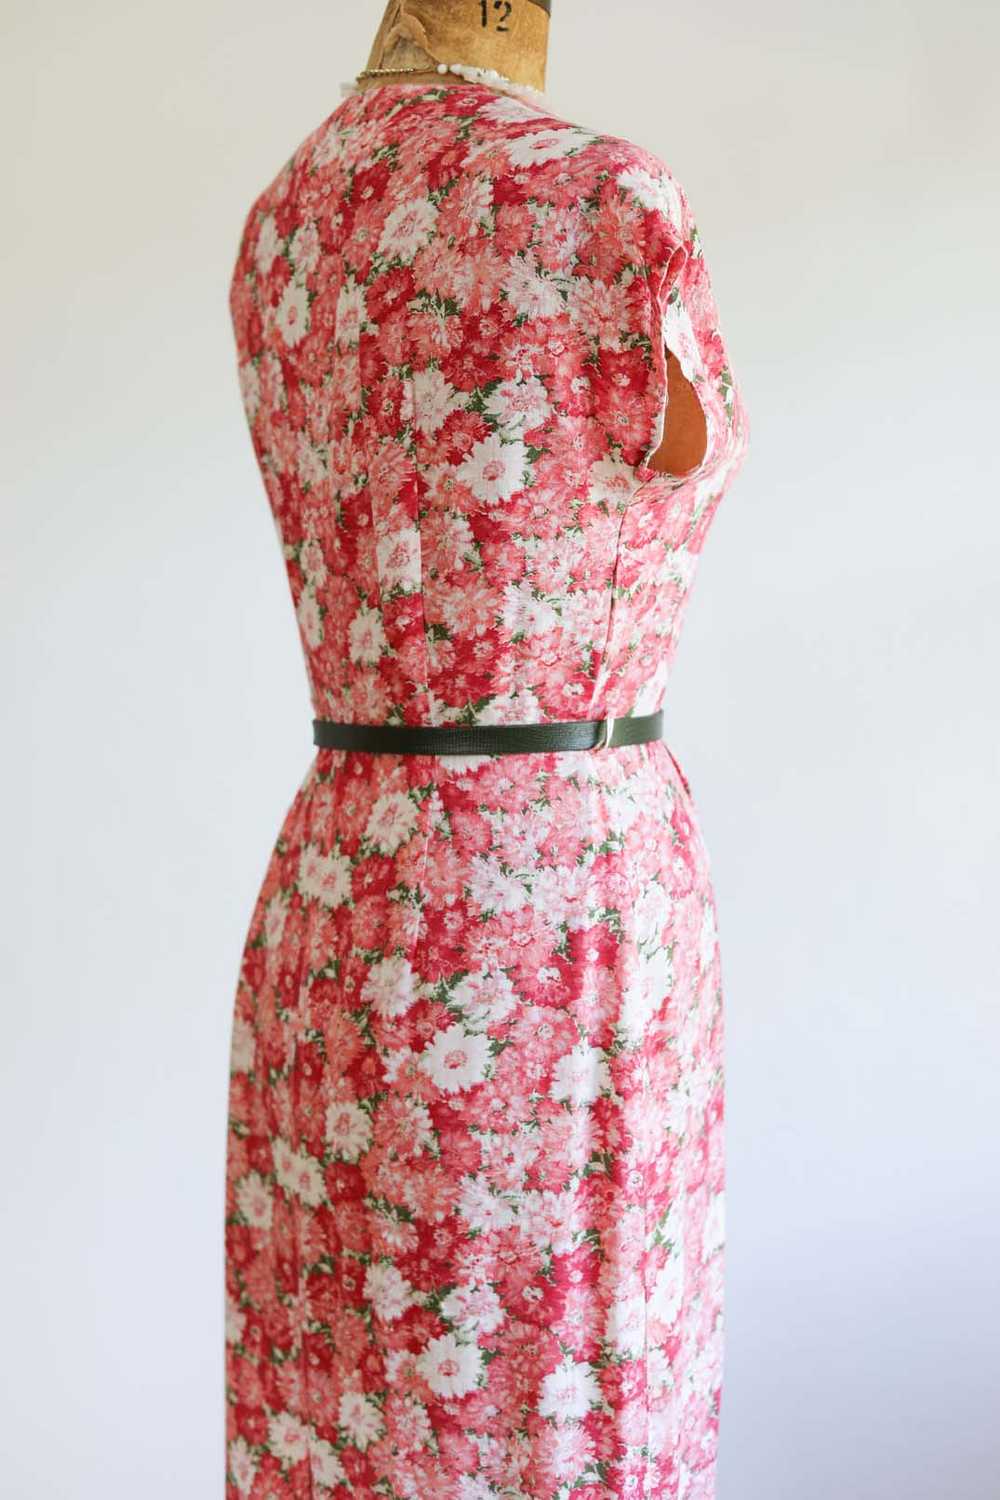 Vintage 1940s to 1950s Dress - STUNNING Gently As… - image 6